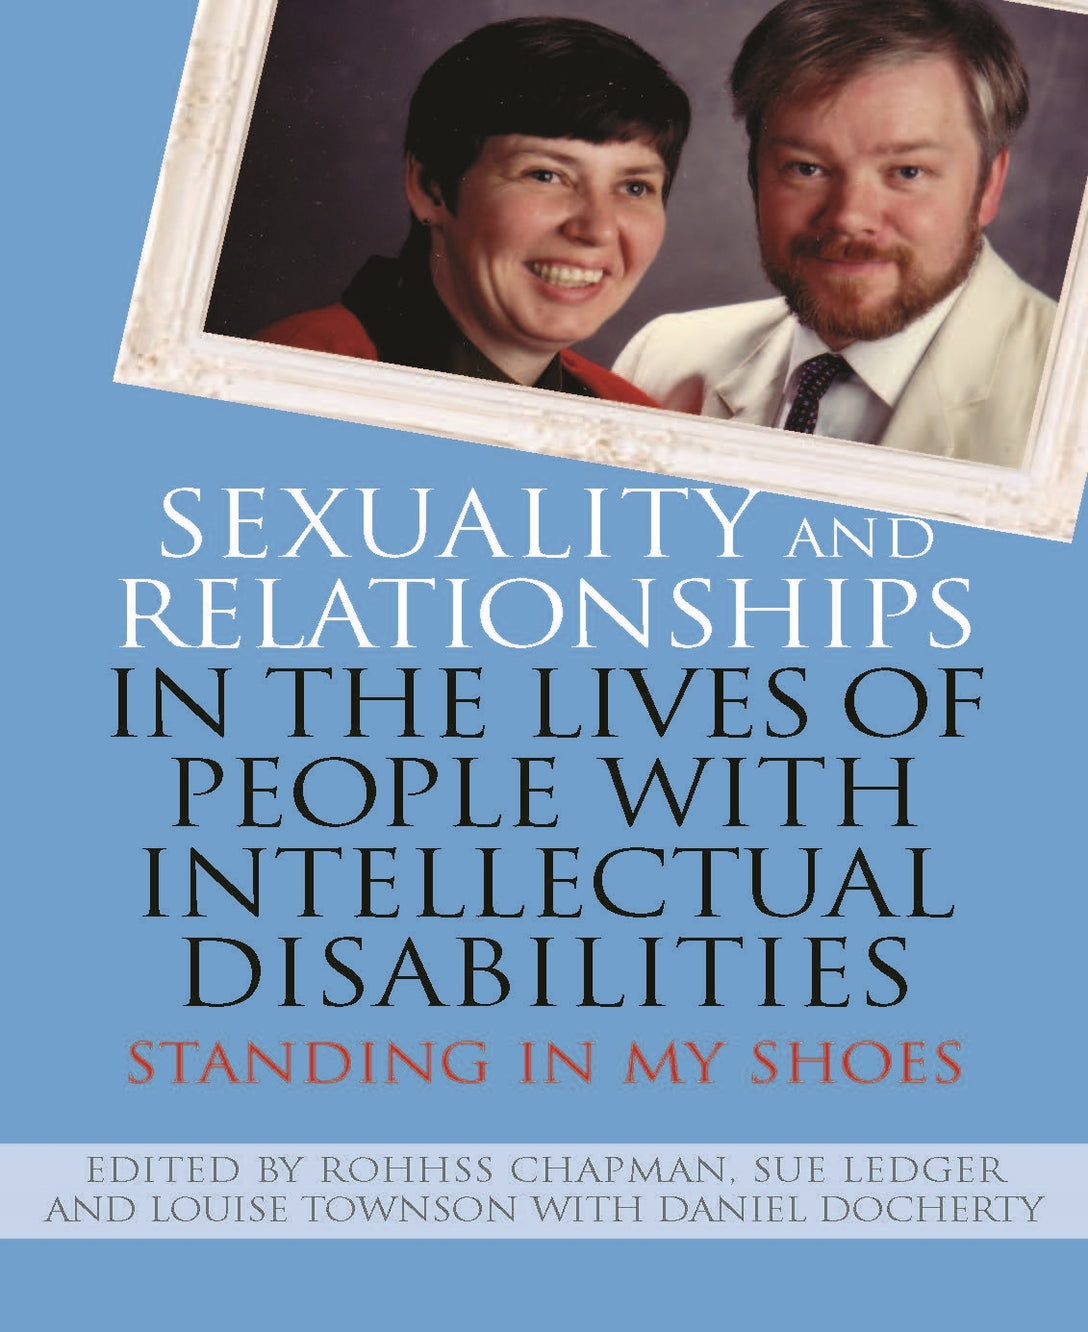 Sexuality and Relationships in the Lives of People with Intellectual Disabilities by Daniel Docherty, Sue Ledger, Louise Townson, Rohhss Chapman, No Author Listed